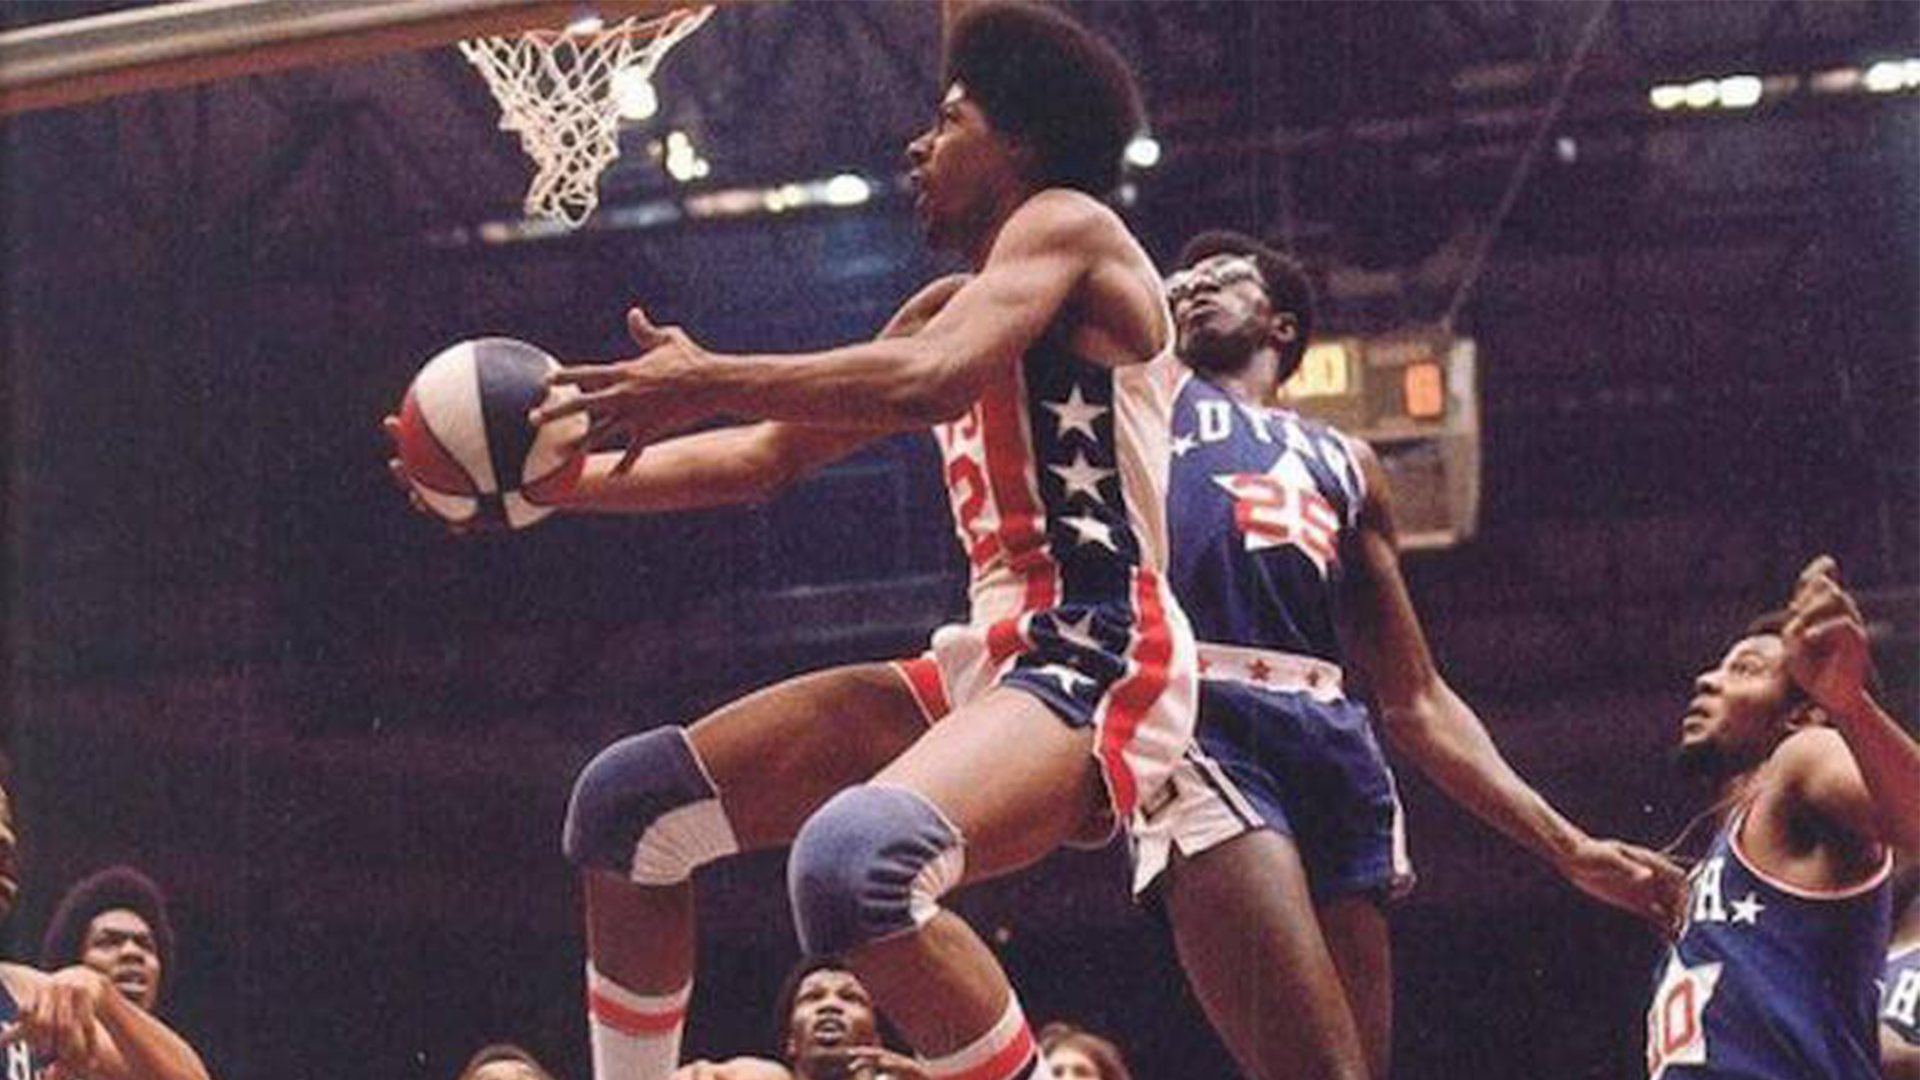 NBA Announces $24.5M Program To Aid Former ABA Players With Medical Bills And Rent Payments